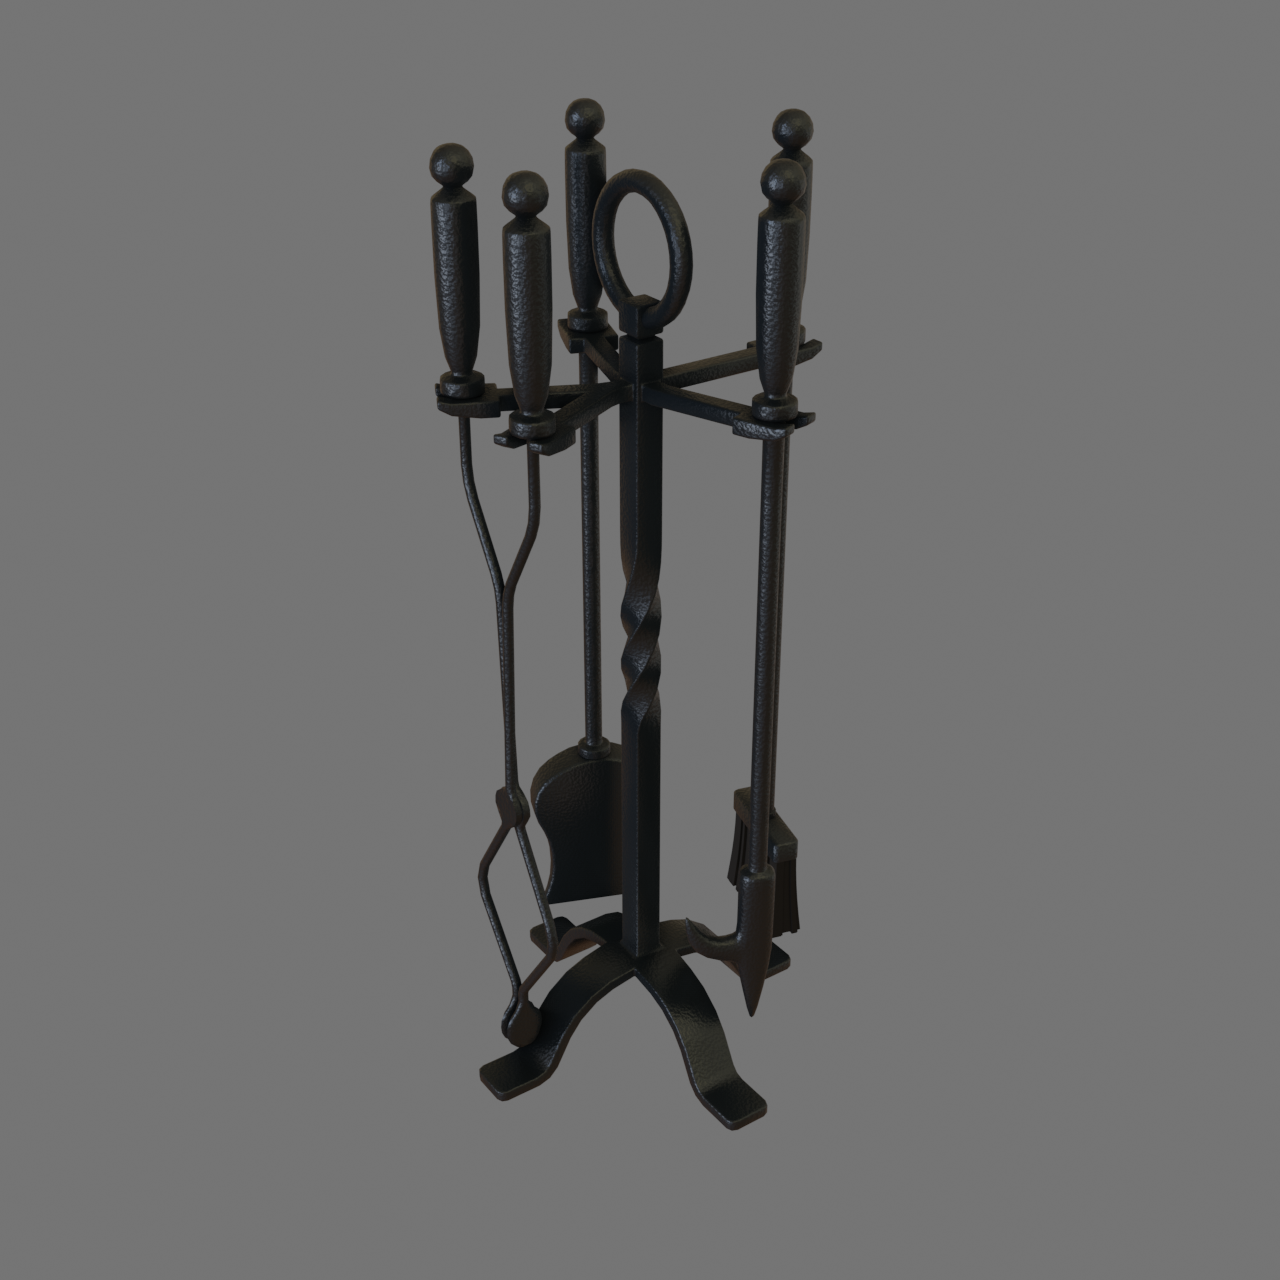 Fireplace Tools preview image 1